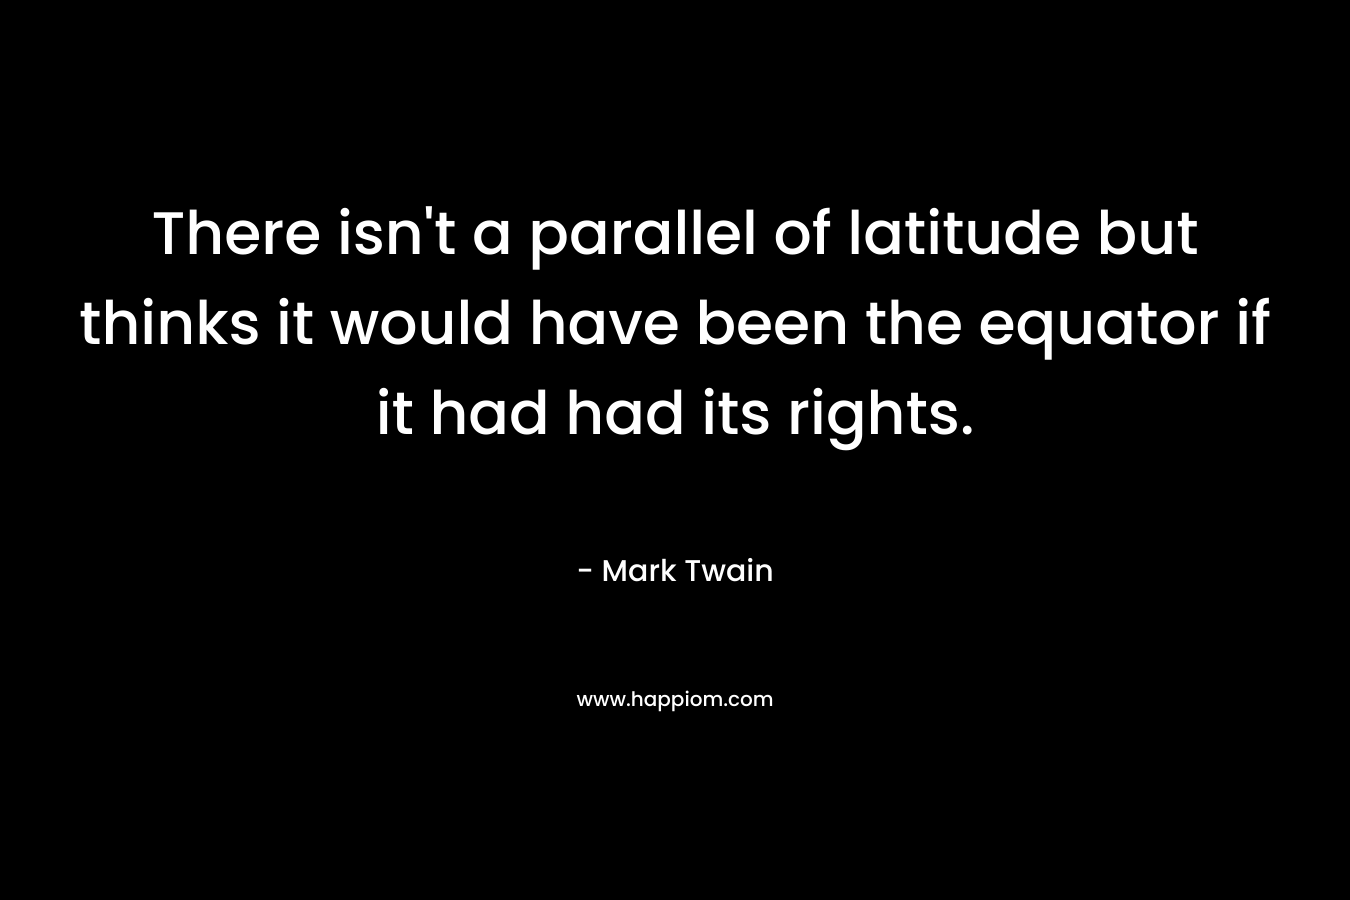 There isn’t a parallel of latitude but thinks it would have been the equator if it had had its rights. – Mark Twain